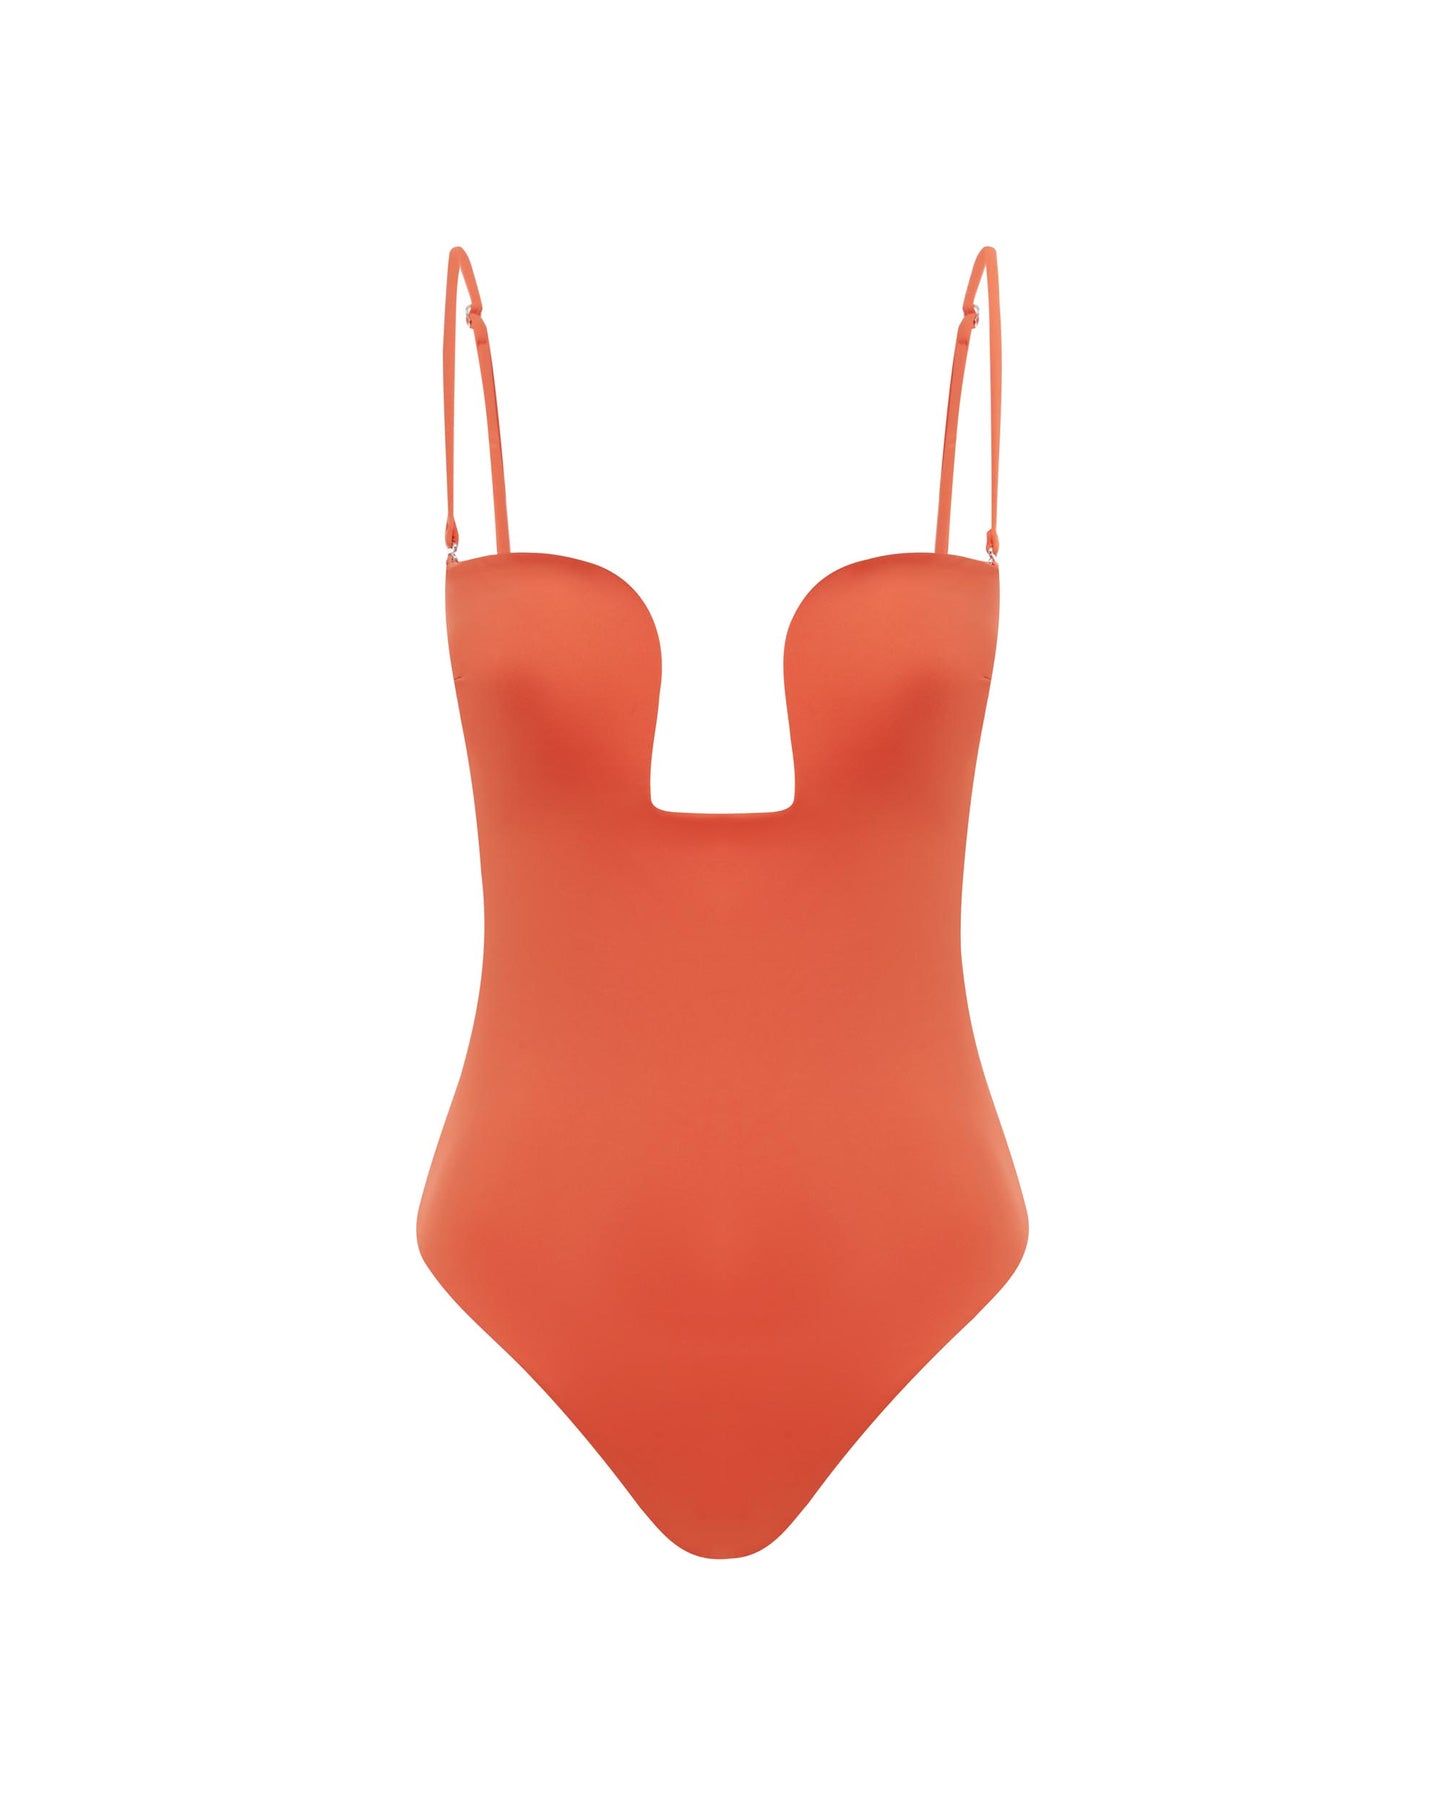 THE CURVE ONE PIECE - FLAME